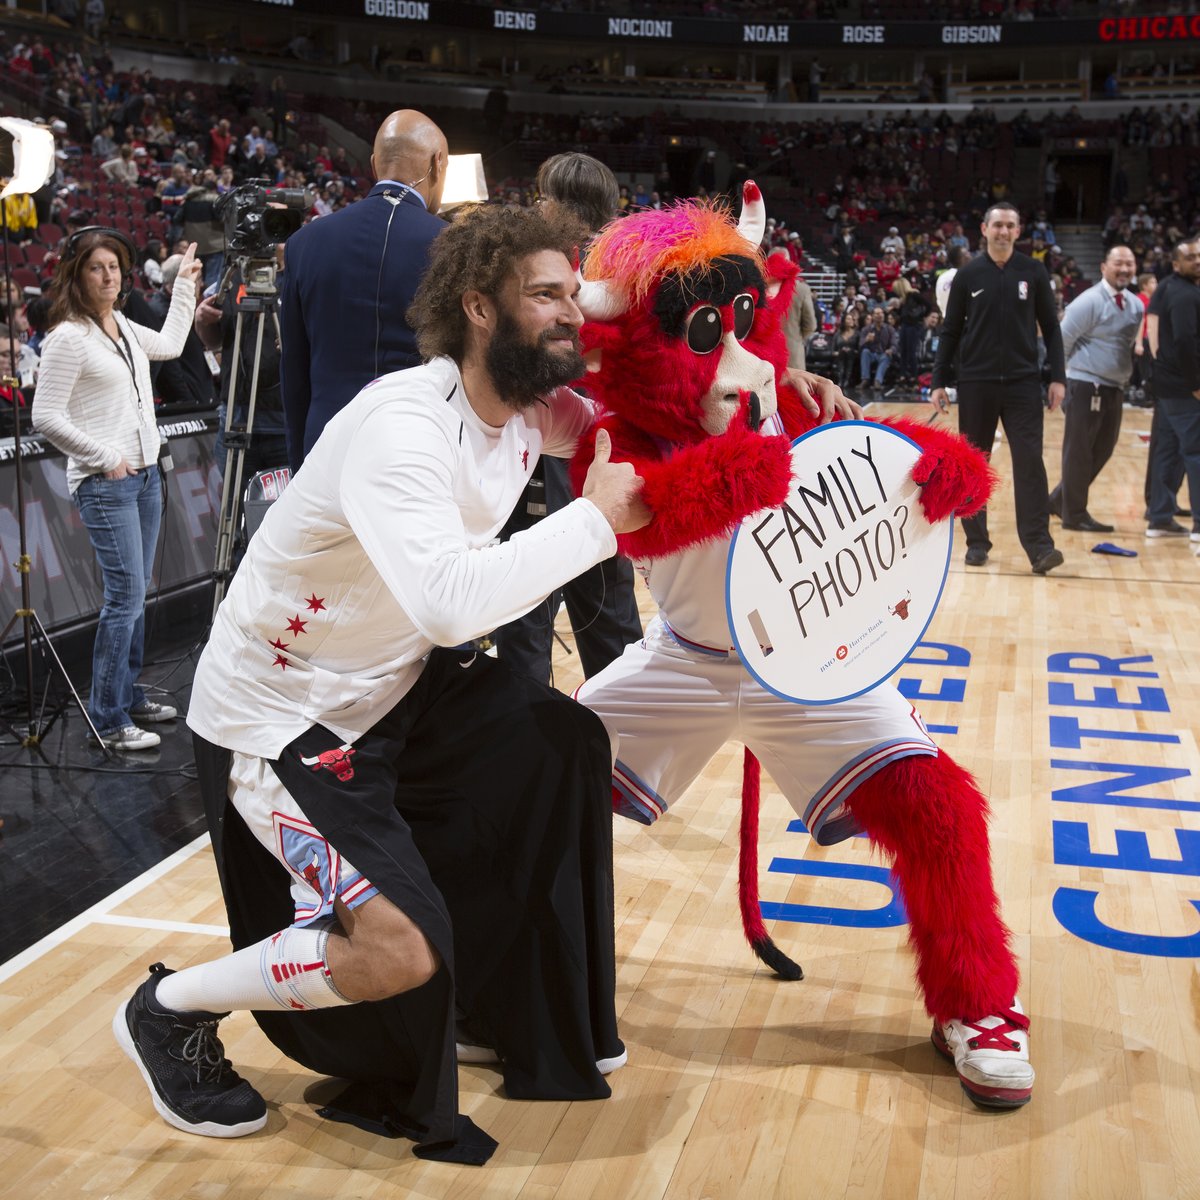 Man behind Benny the Bull is leaving